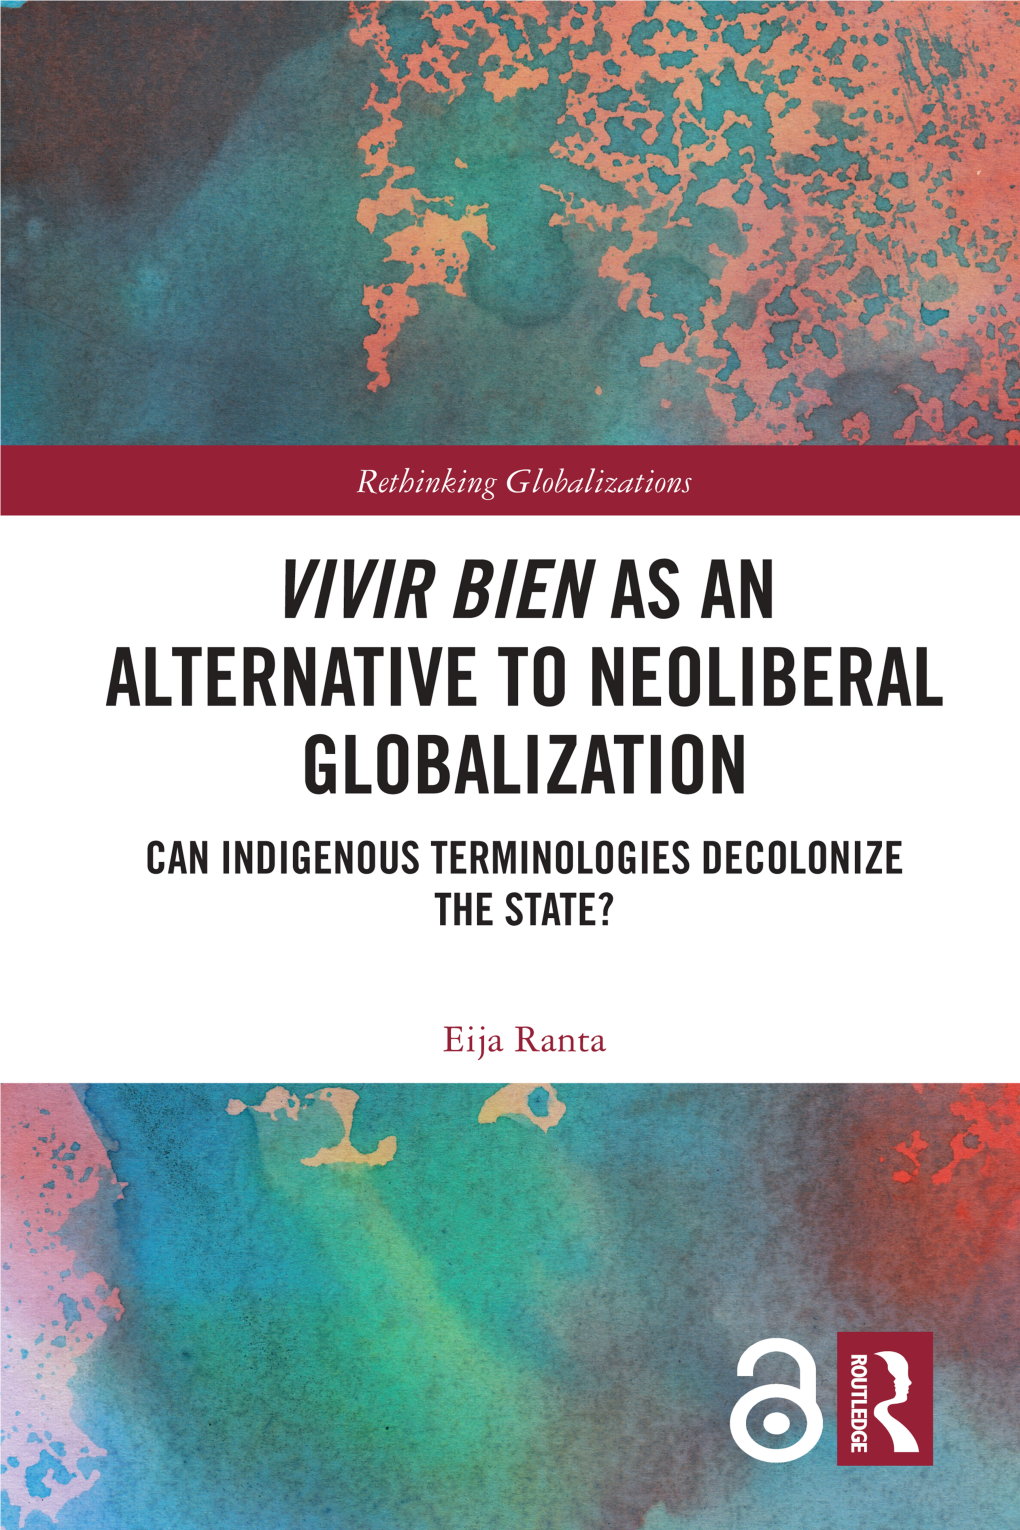 Vivir Bien As an Alternative to Neoliberal Globalization; Can Indigenous Terminologies Decolonize the State?